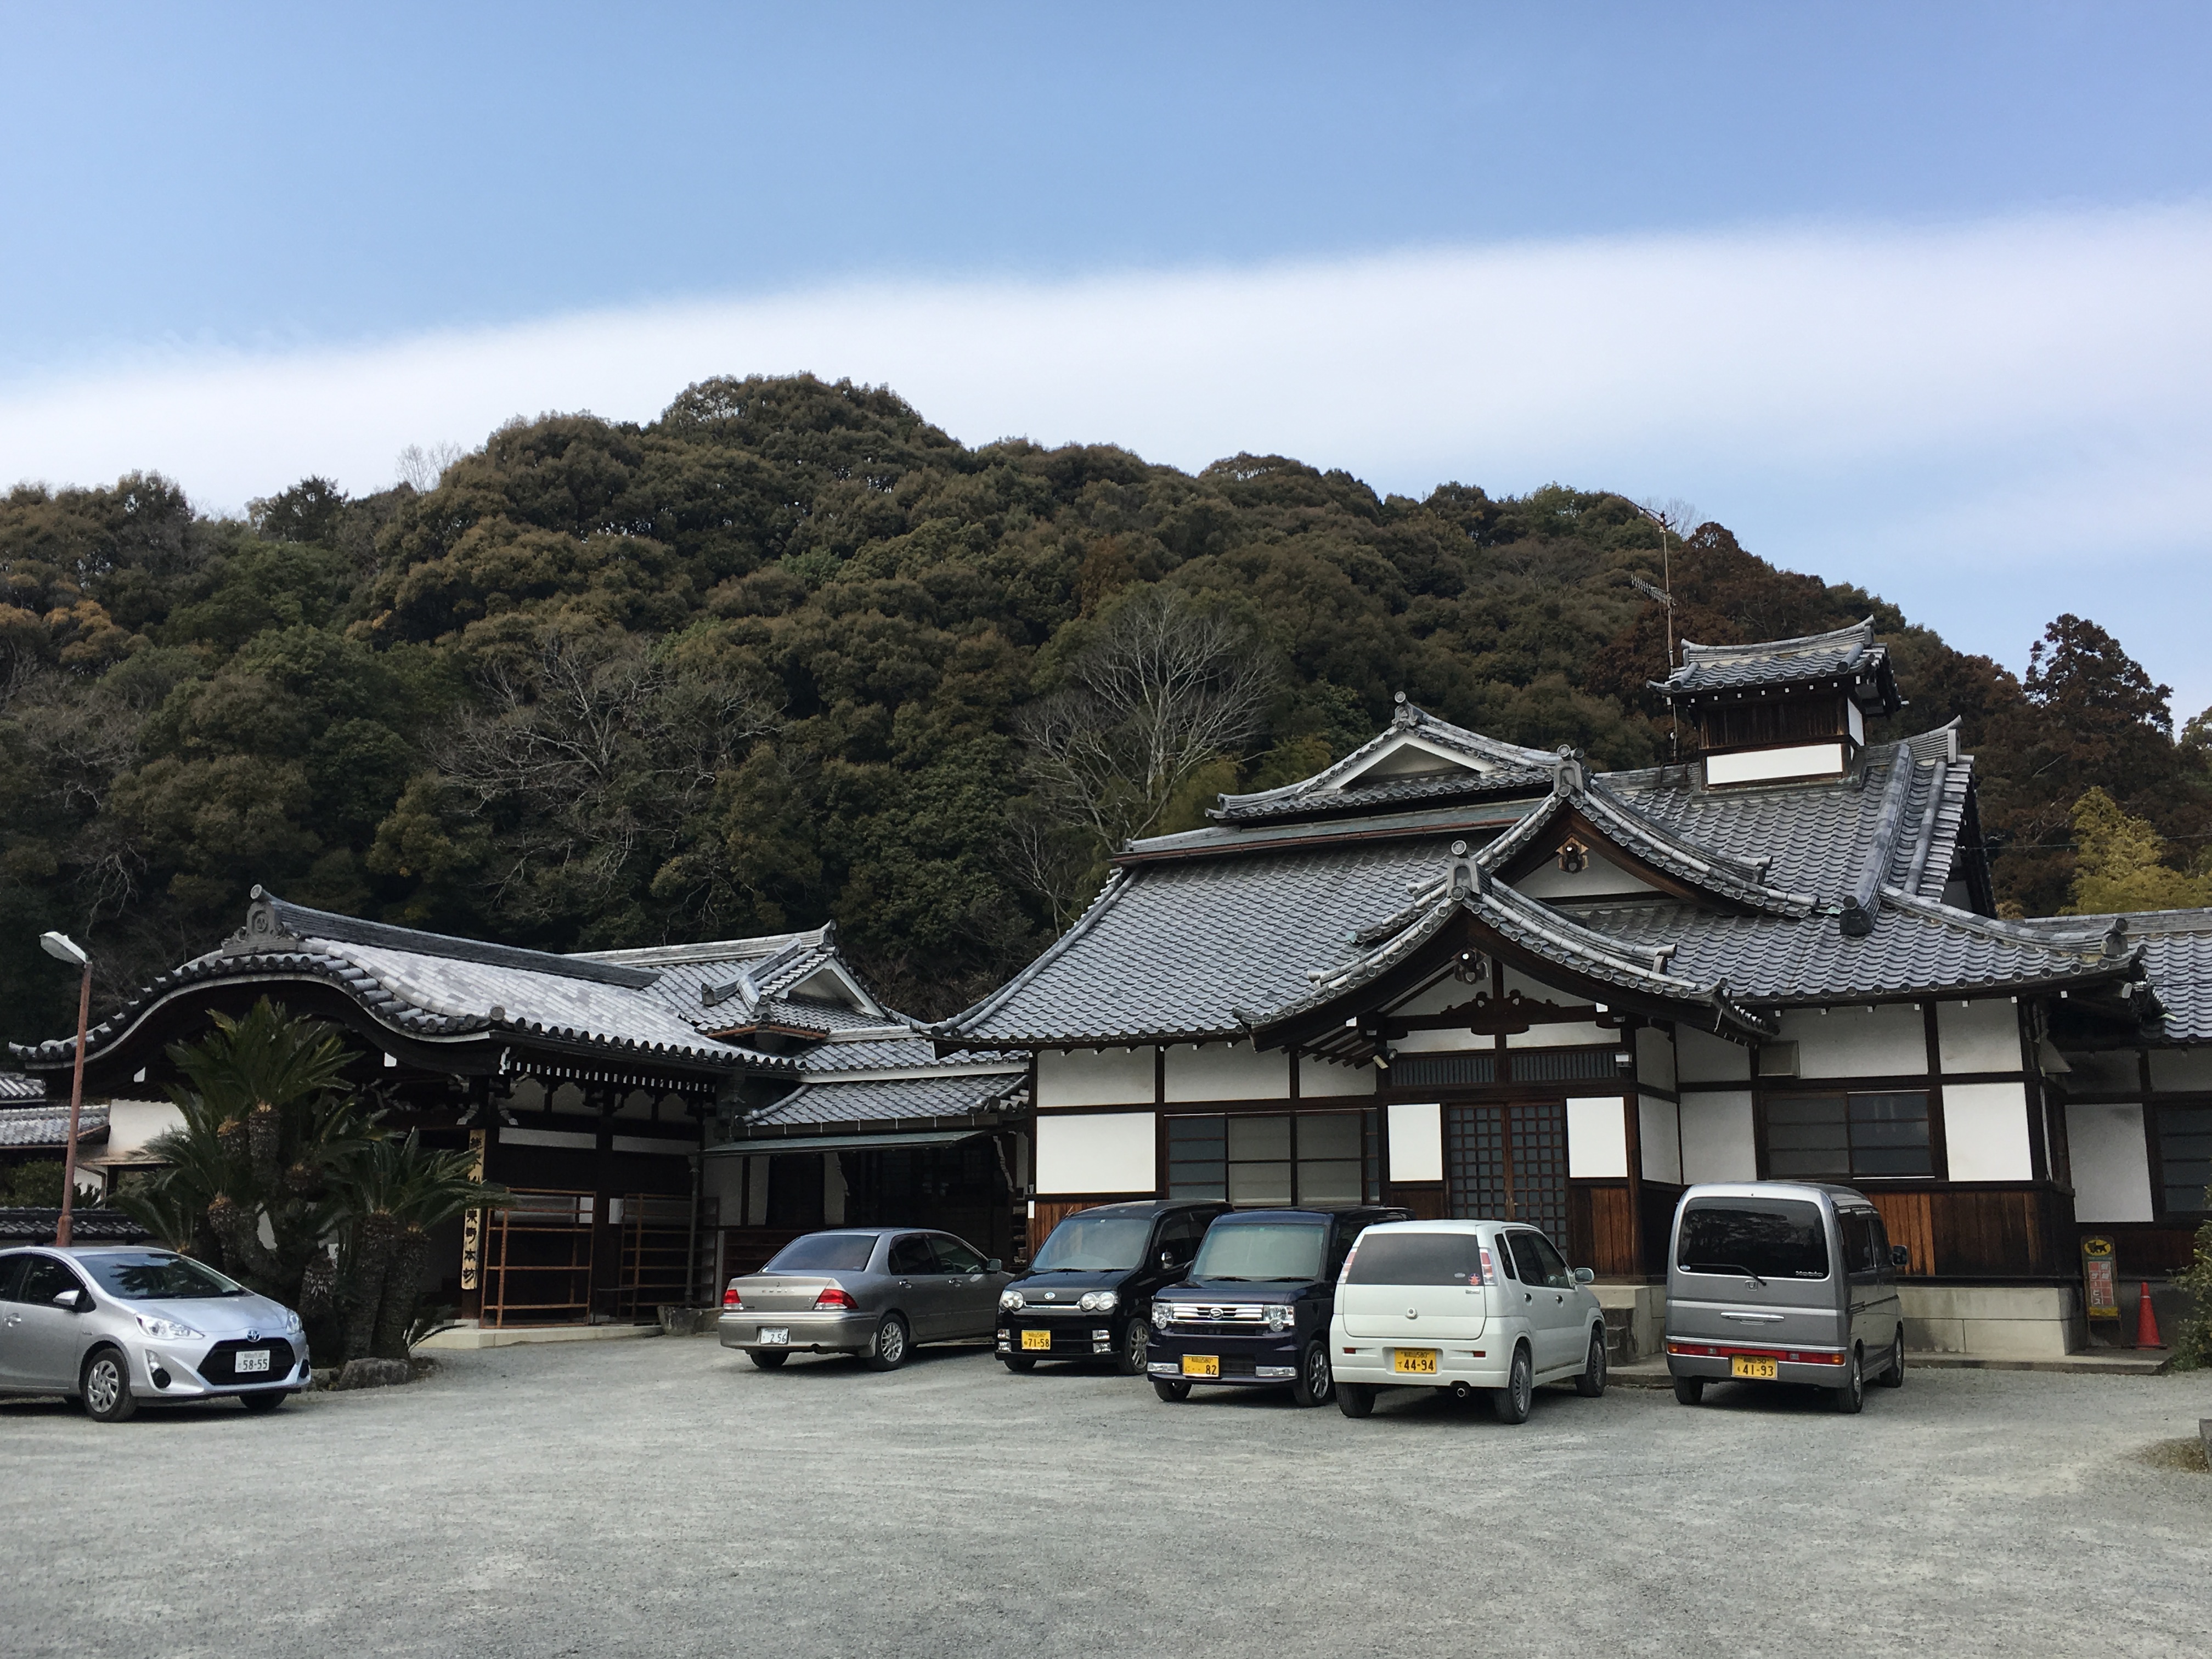 traditional Japanese building with cars parked out front